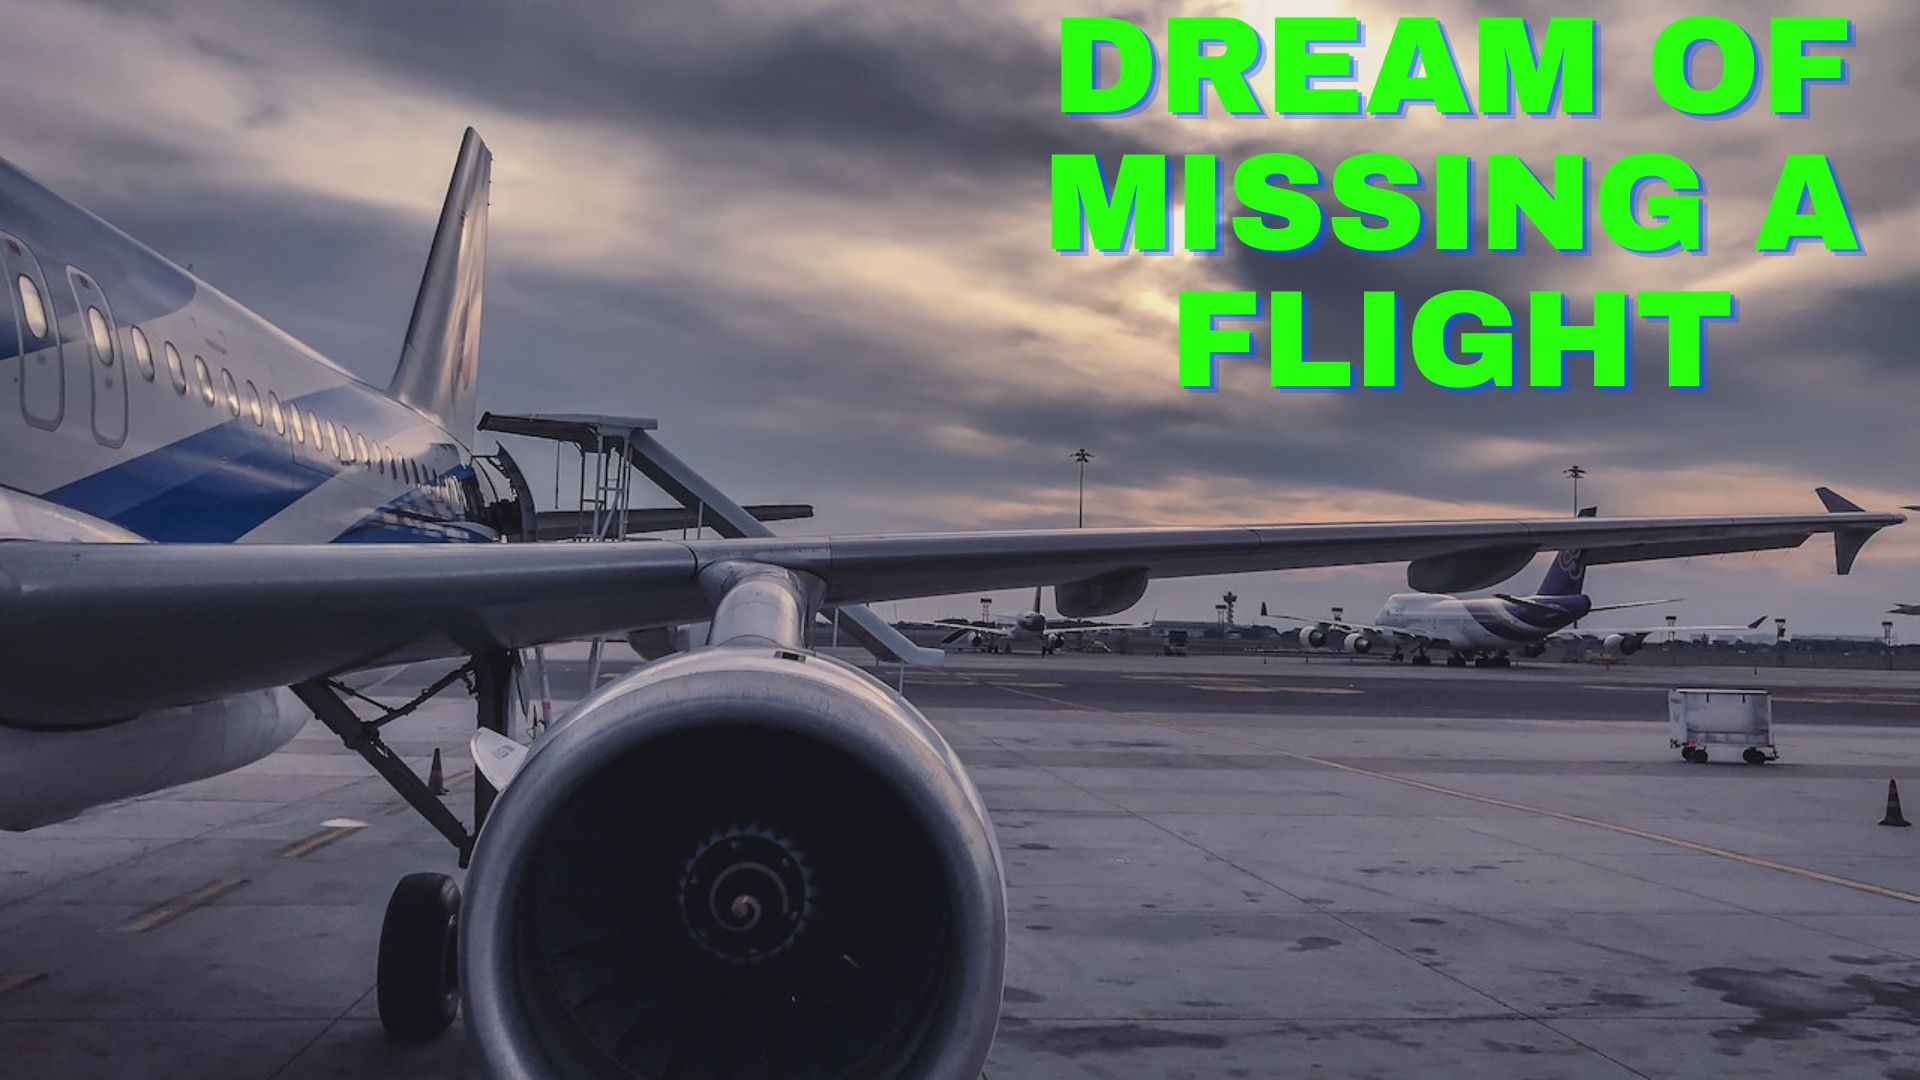 Dream Of Missing A Flight - Missing An Important Opportunity